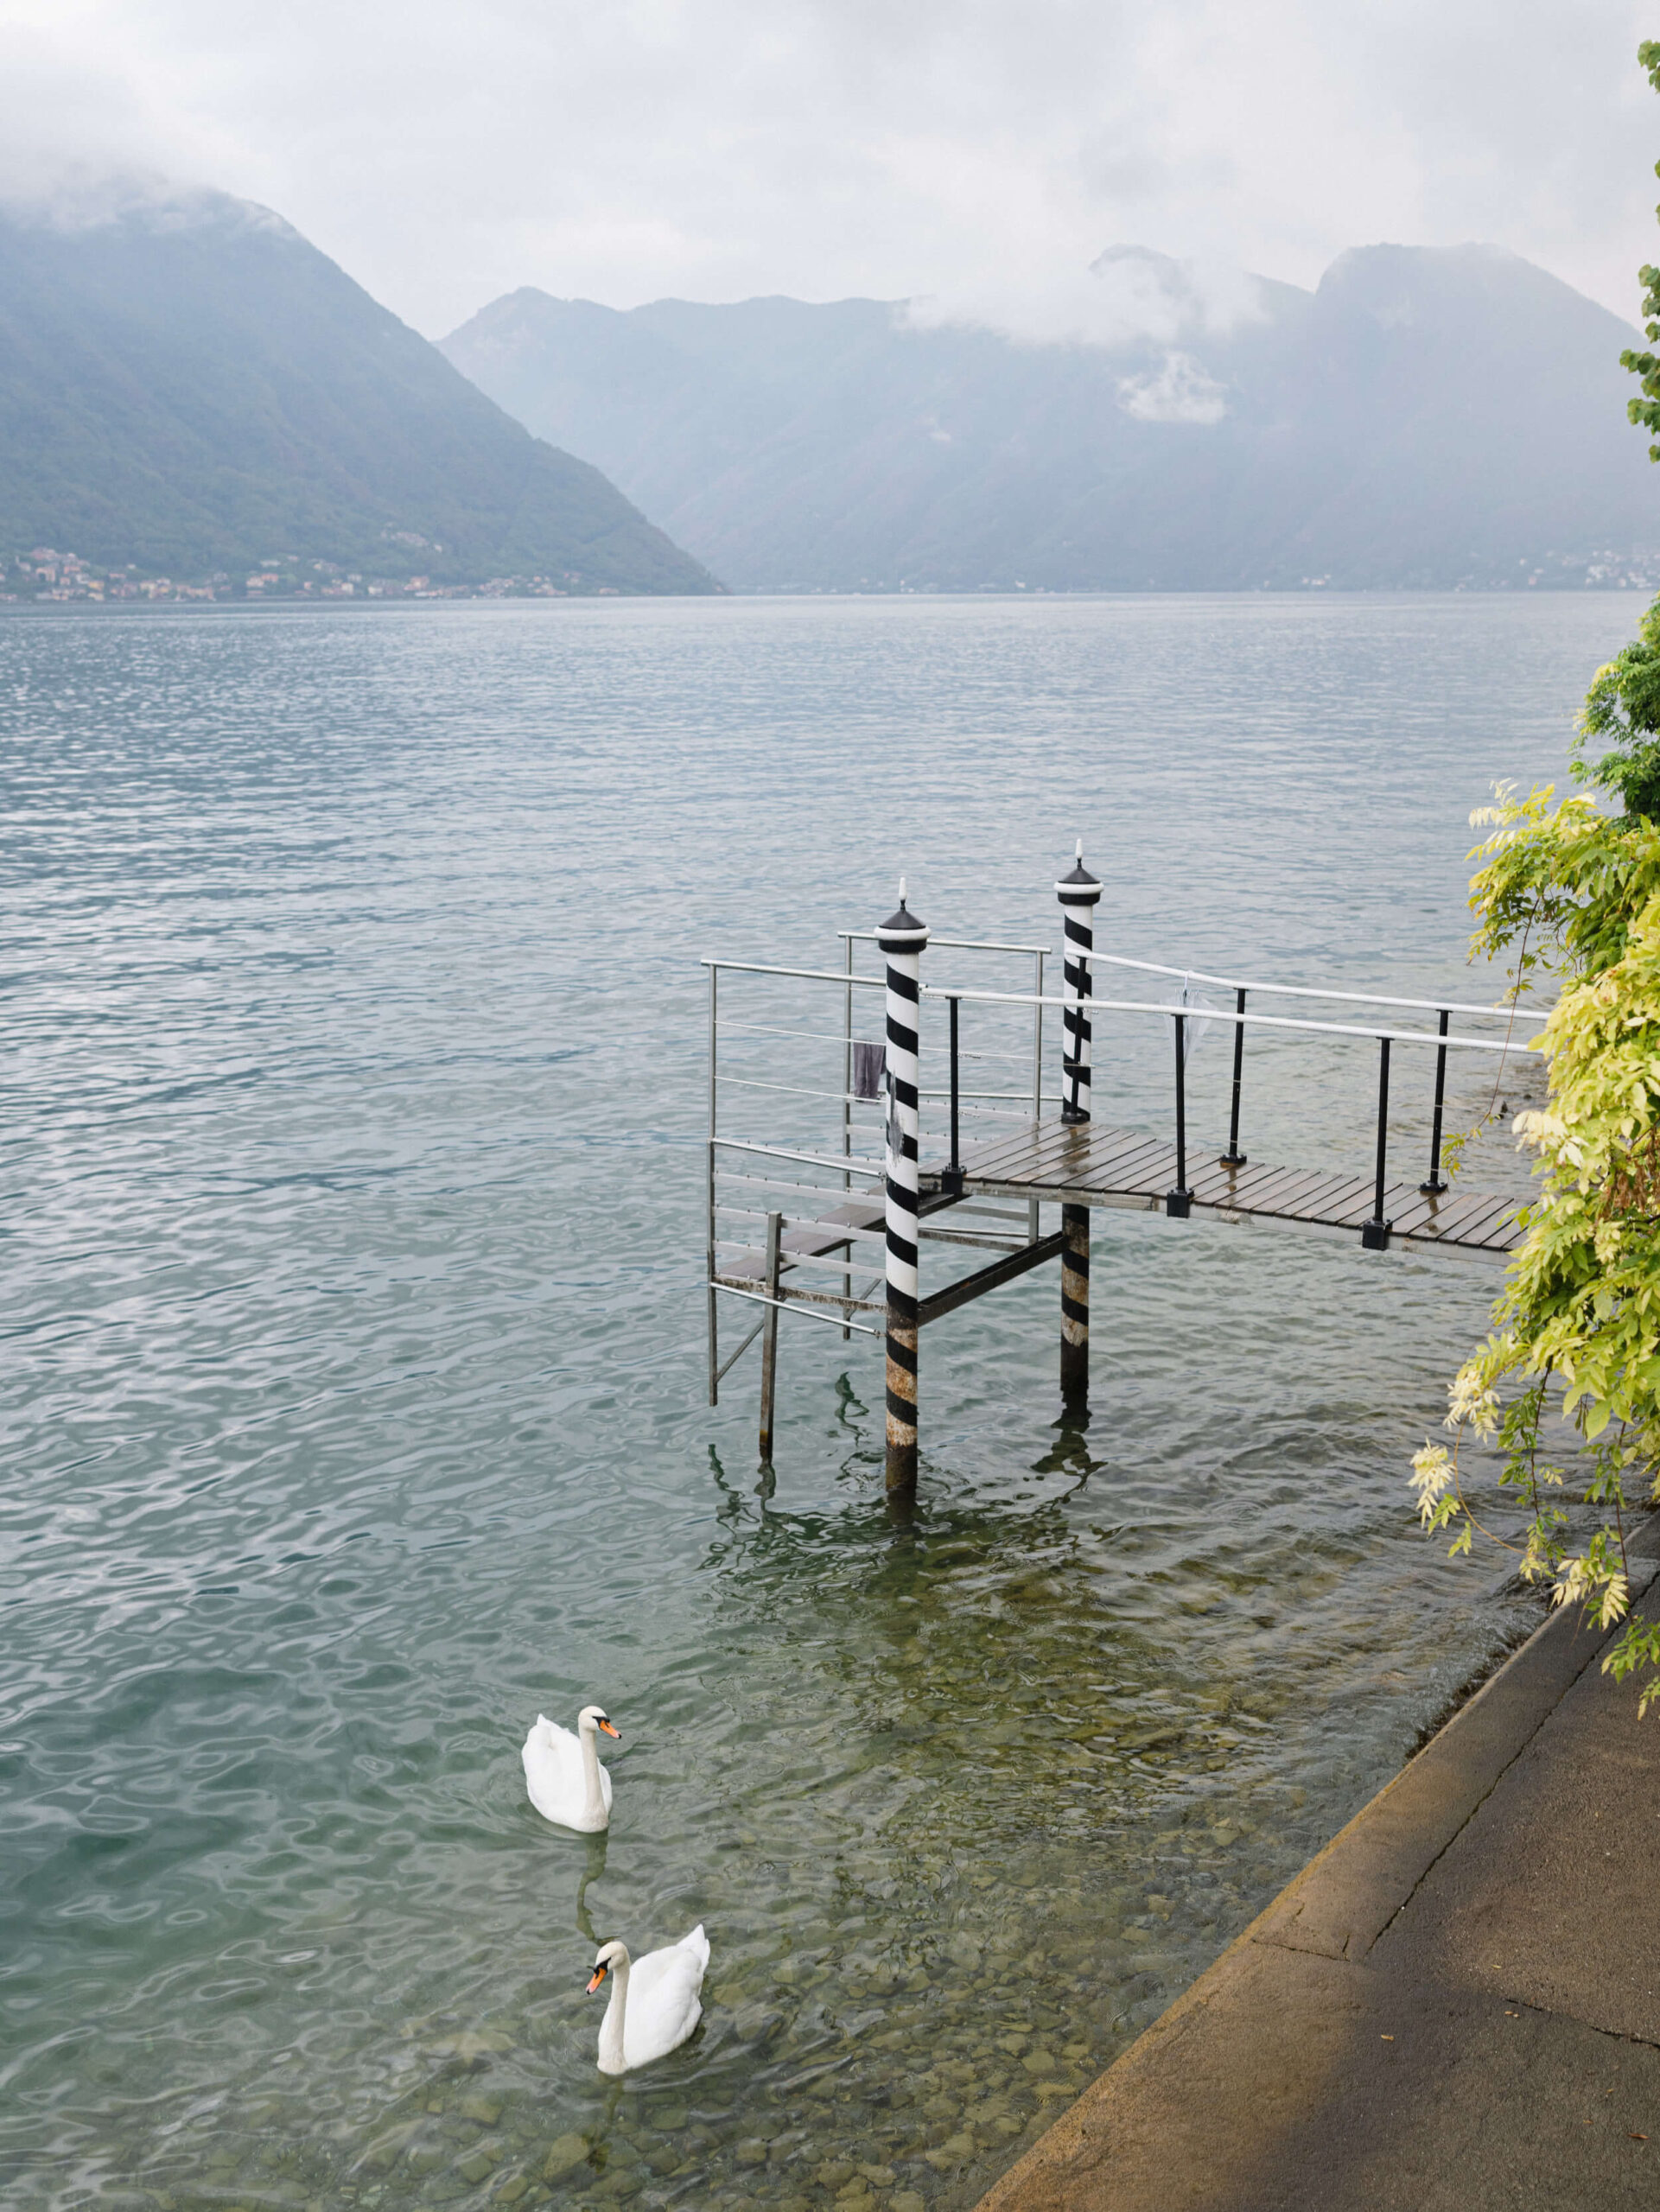 Two swans swimming on Lake Como near the private dock; clouds rolling over the mountains in the distance